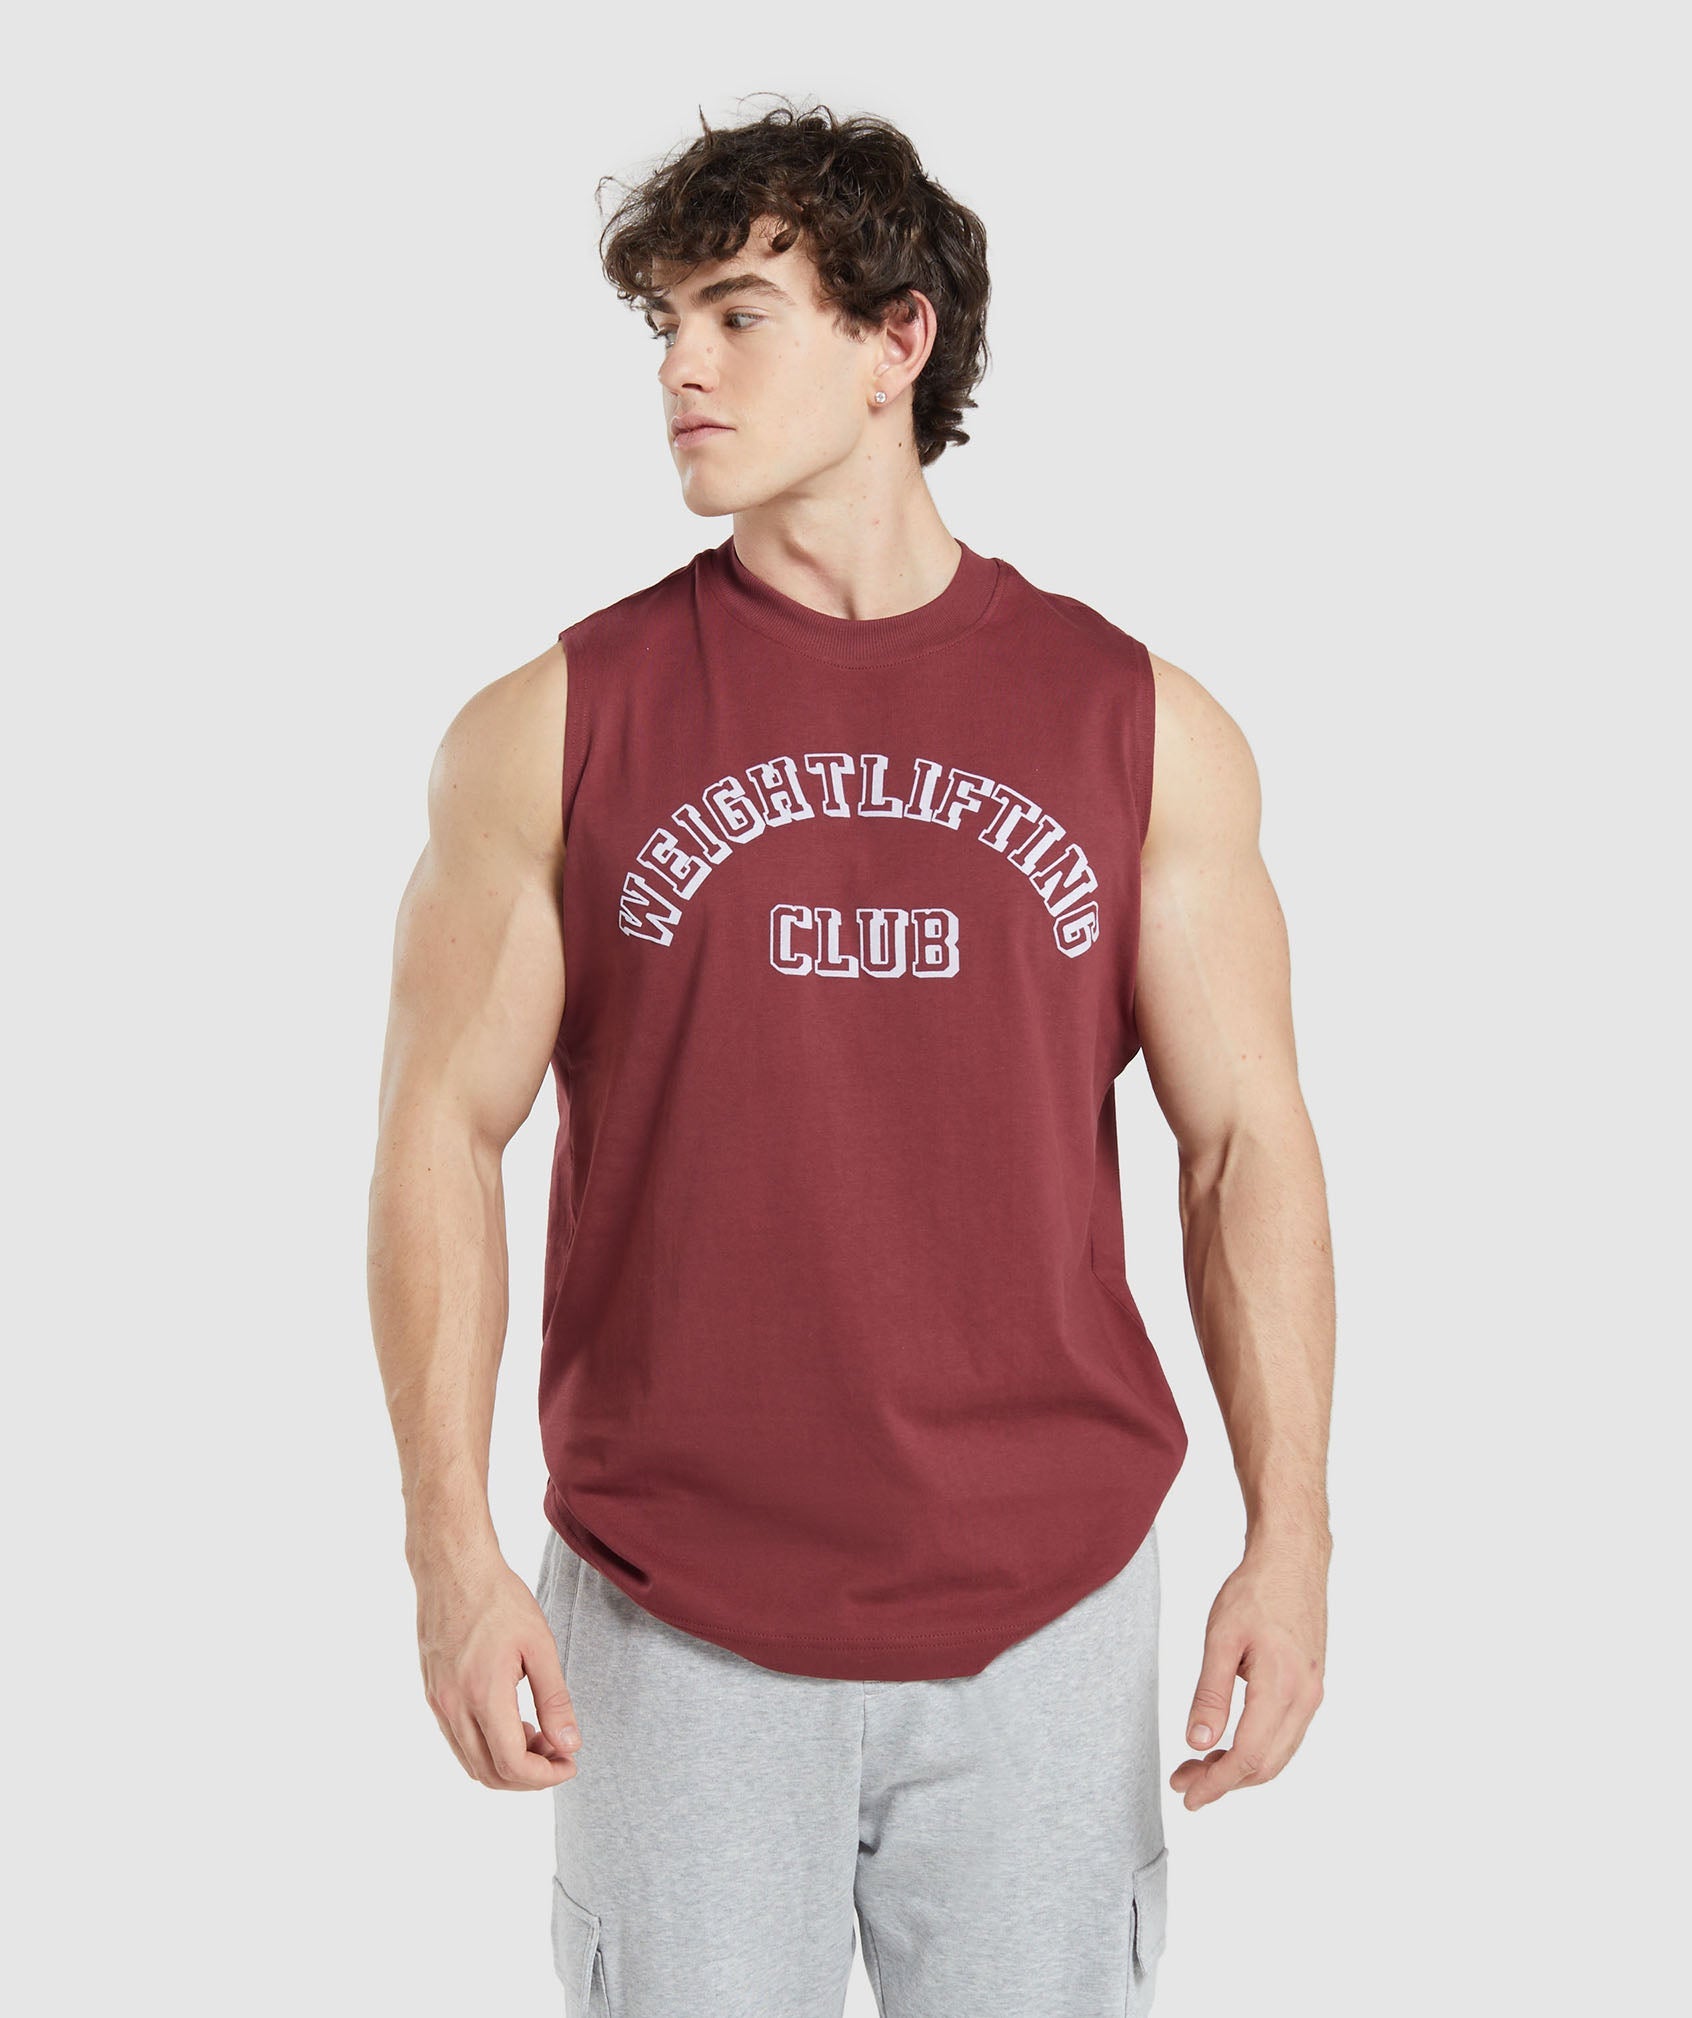 Weightlifting Club Tank in Washed Burgundy - view 1